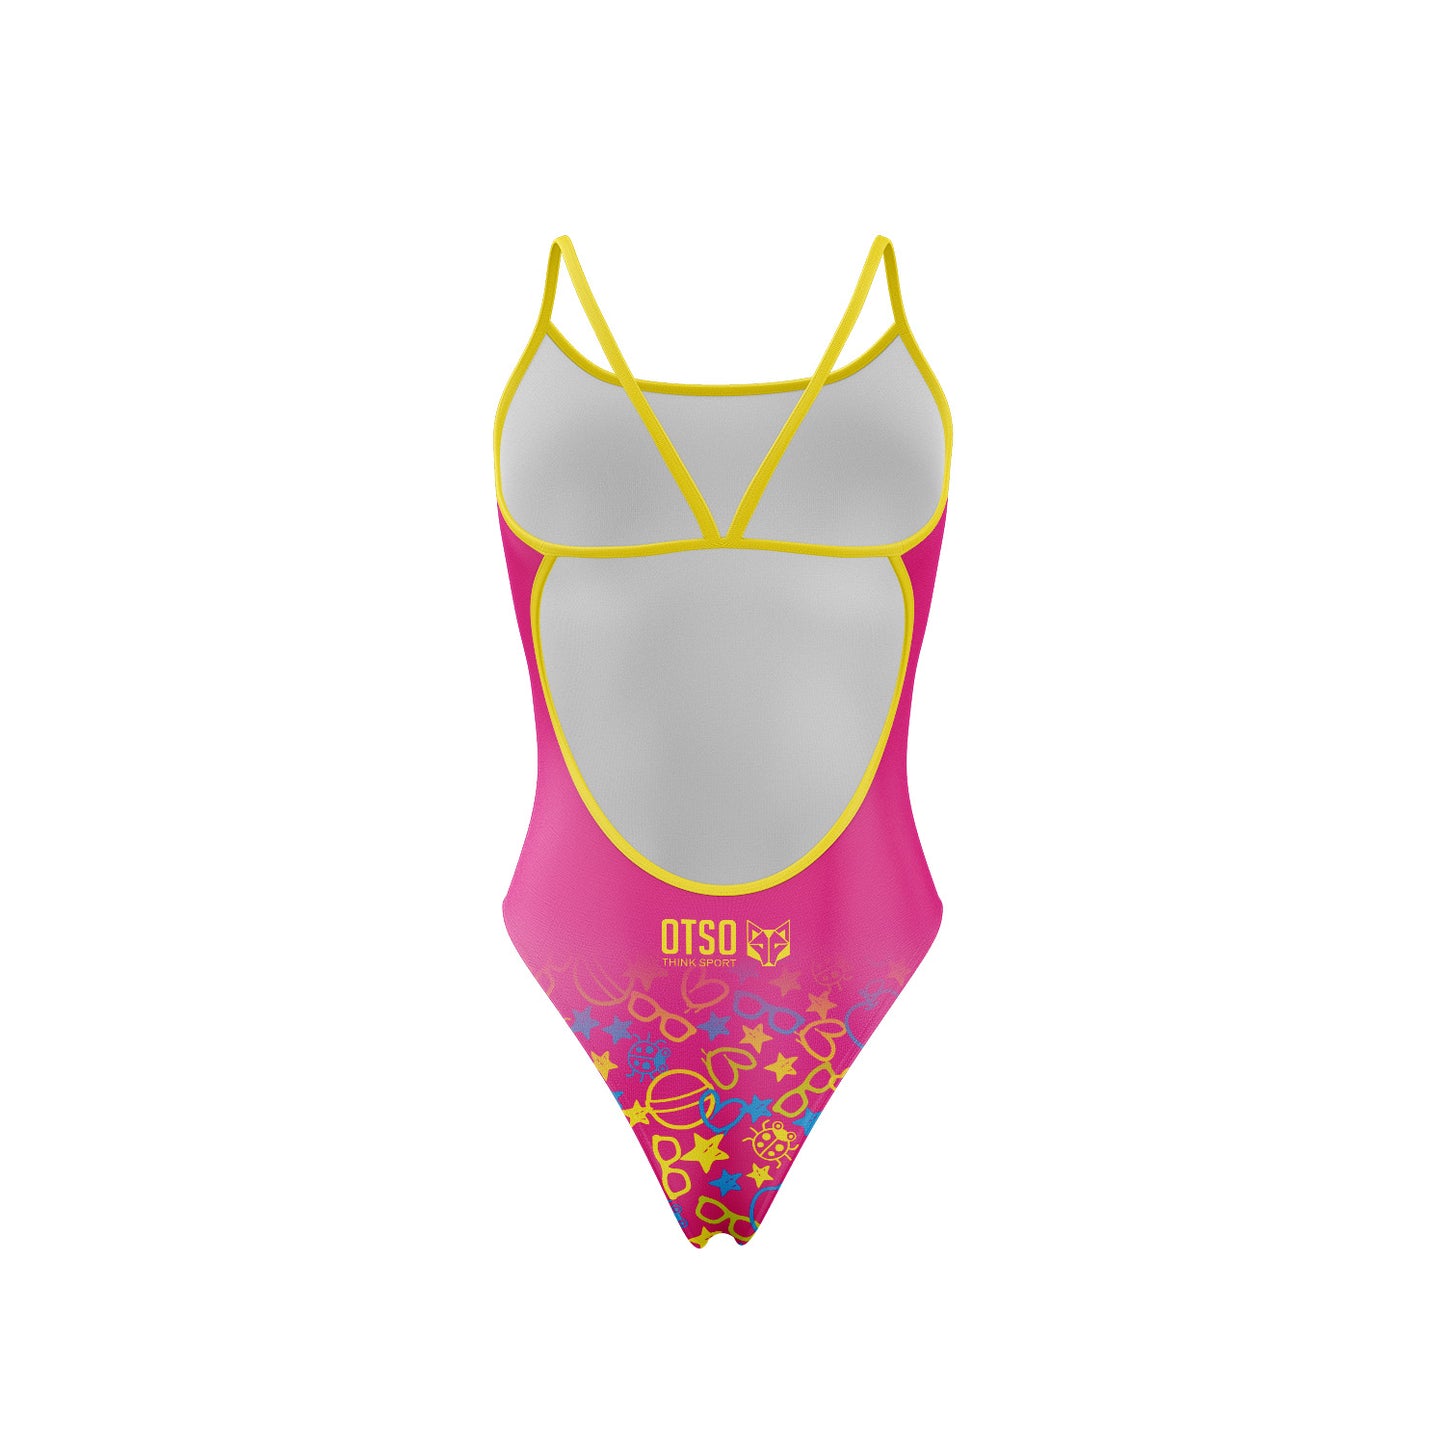 Girls and women's swimsuit - Hello Kitty Sparkle